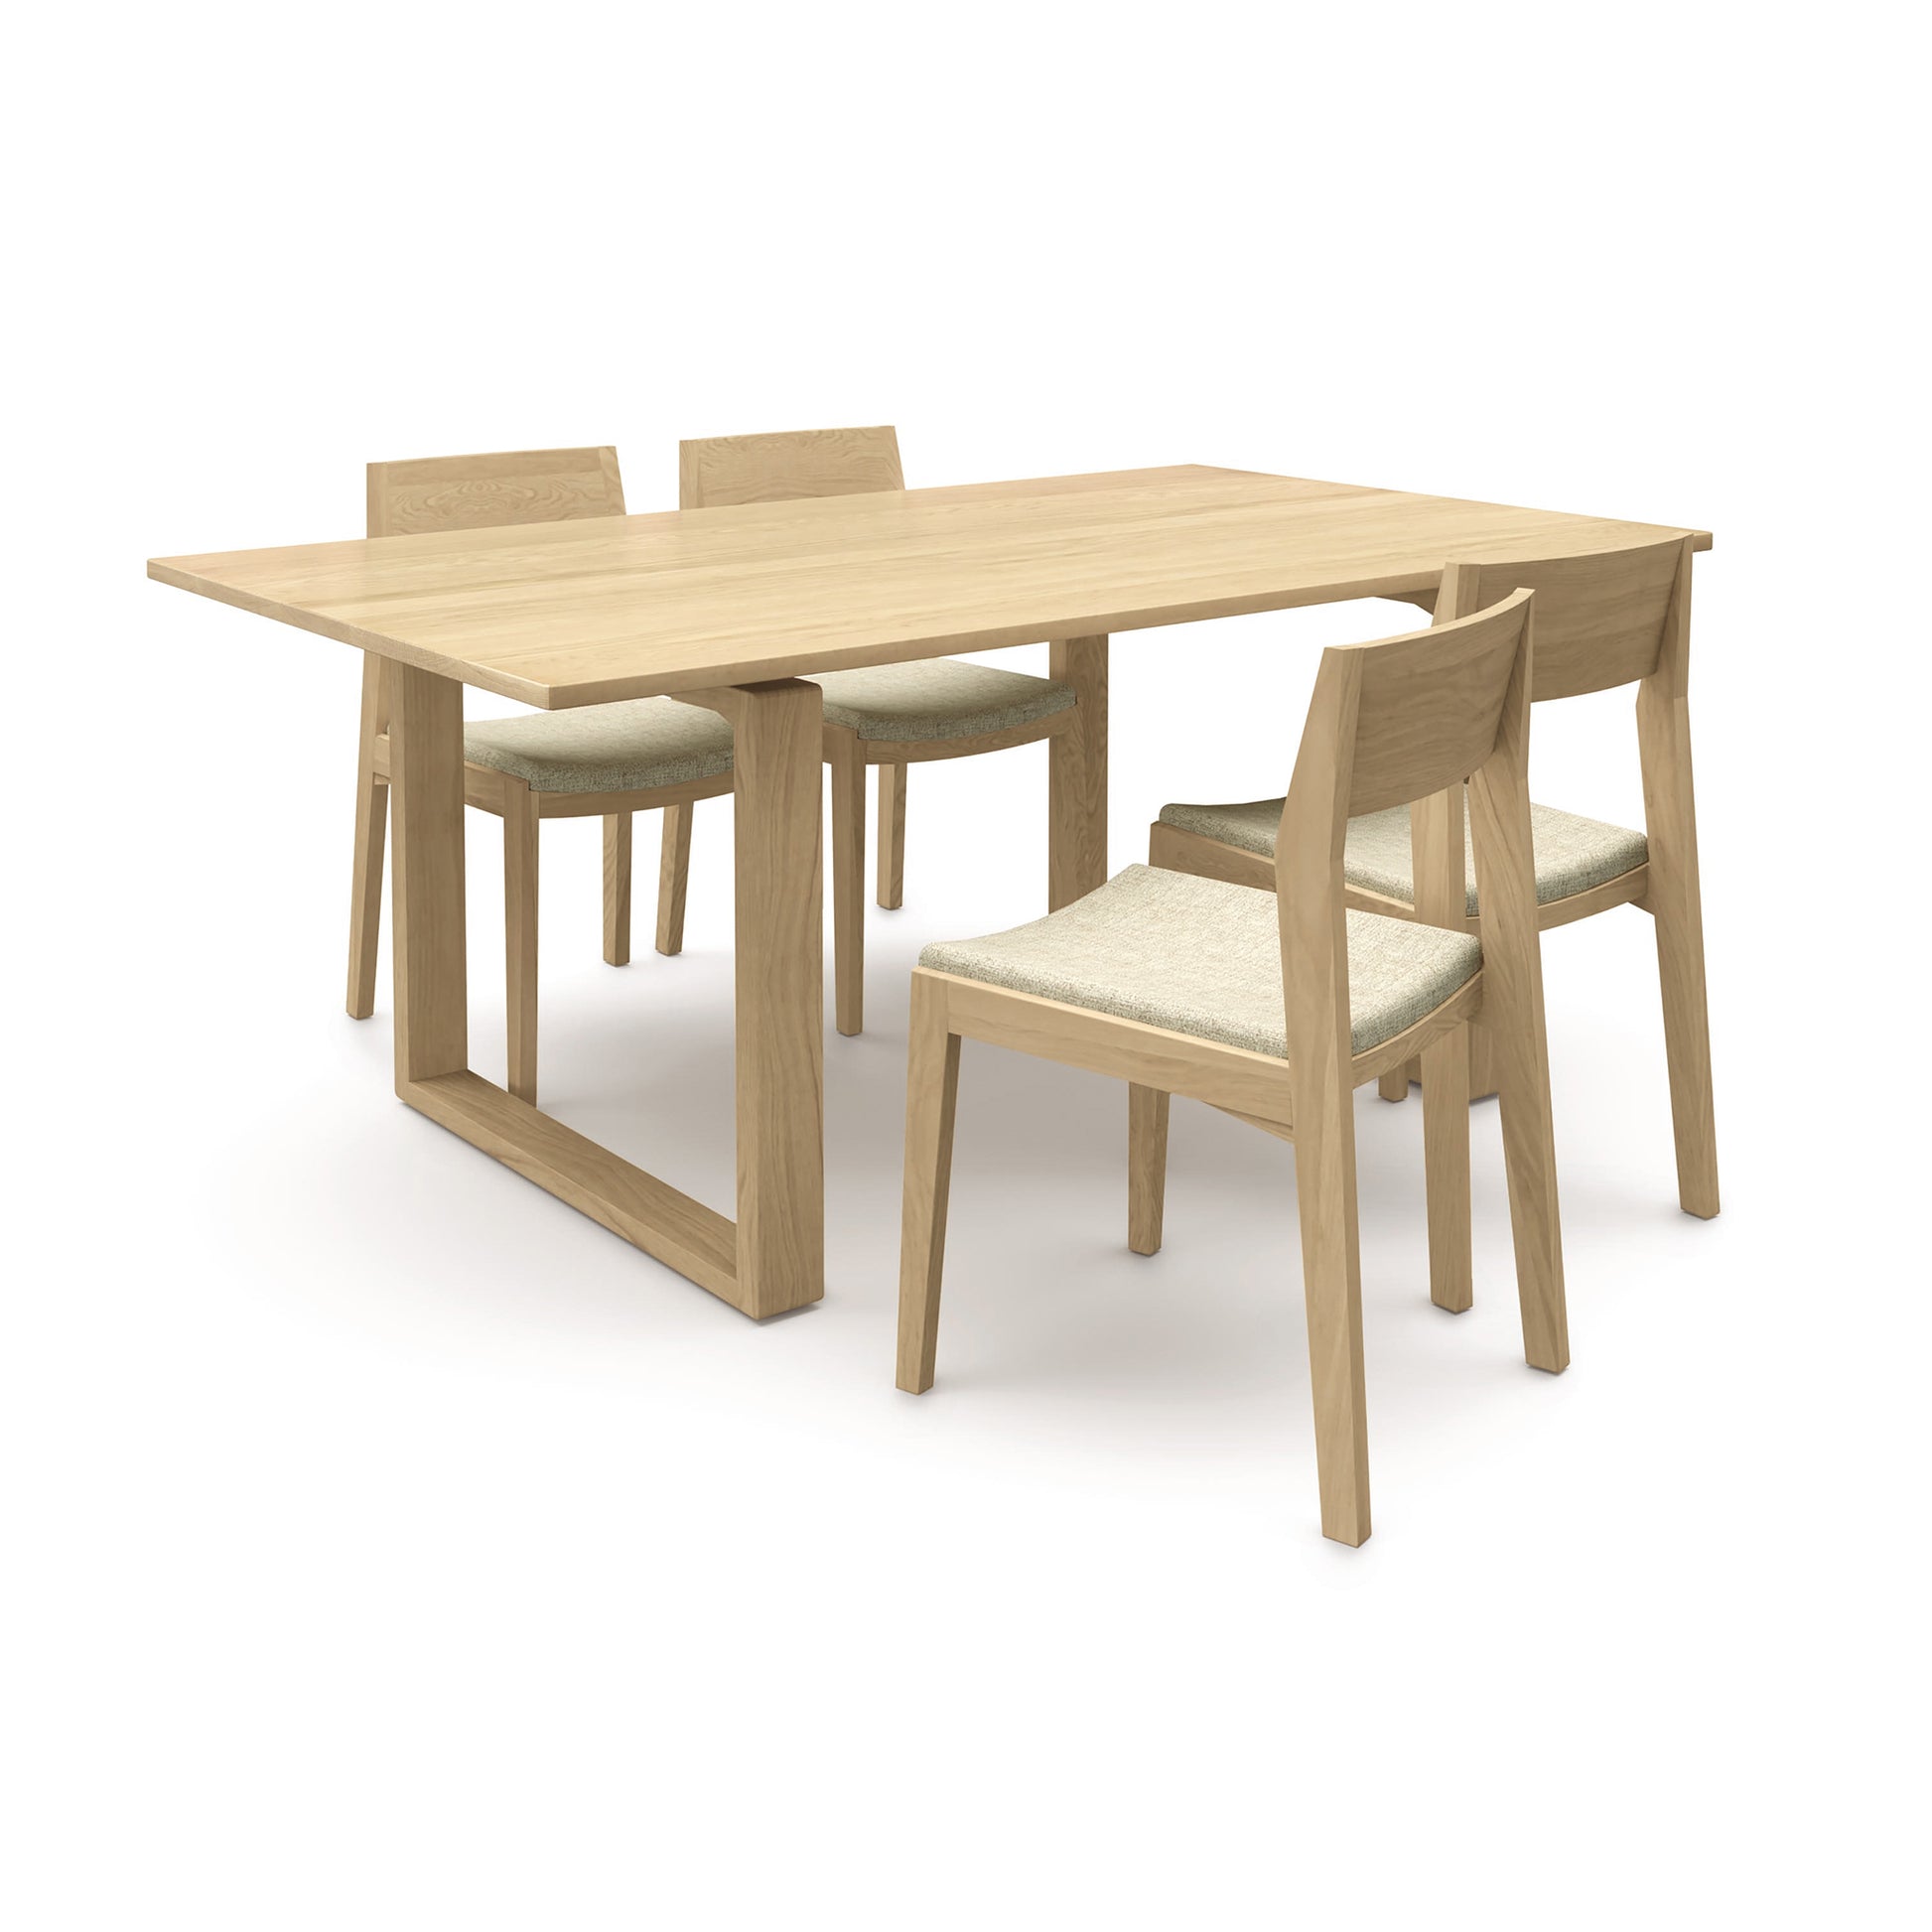 A sustainably sourced Iso Solid Top Dining Table with four matching chairs set on a white background by Copeland Furniture.